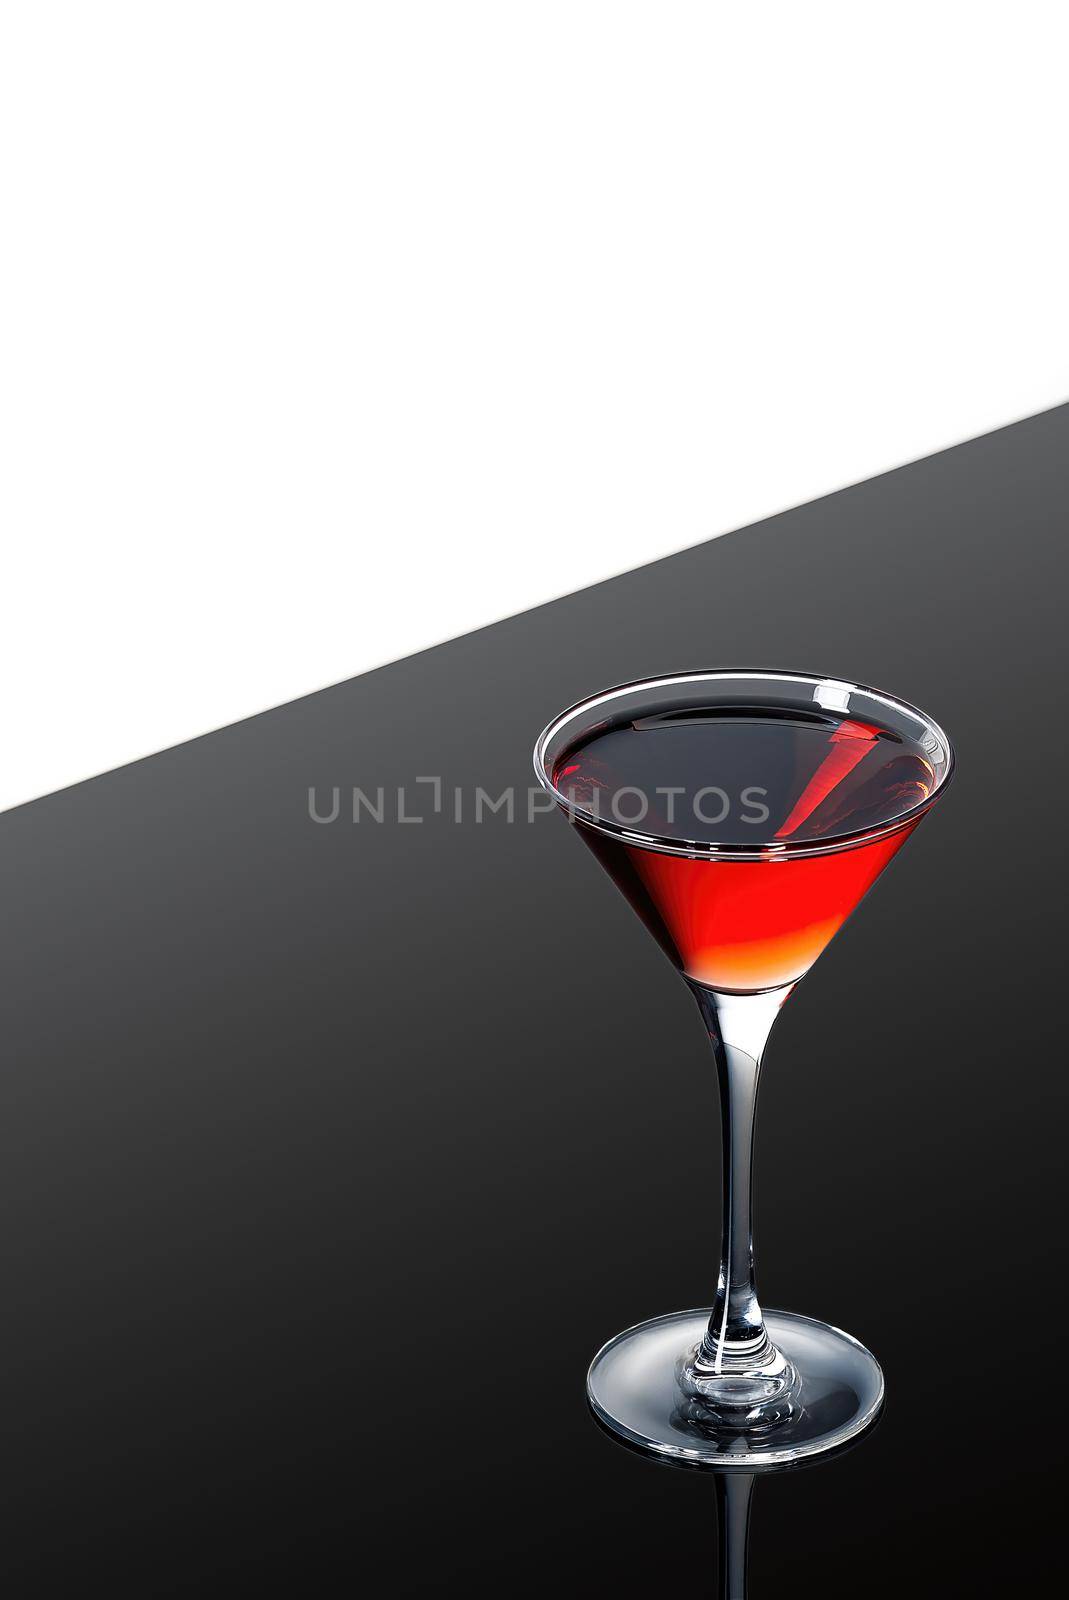 red martini cocktail on a dark background fading in to black without garnishe